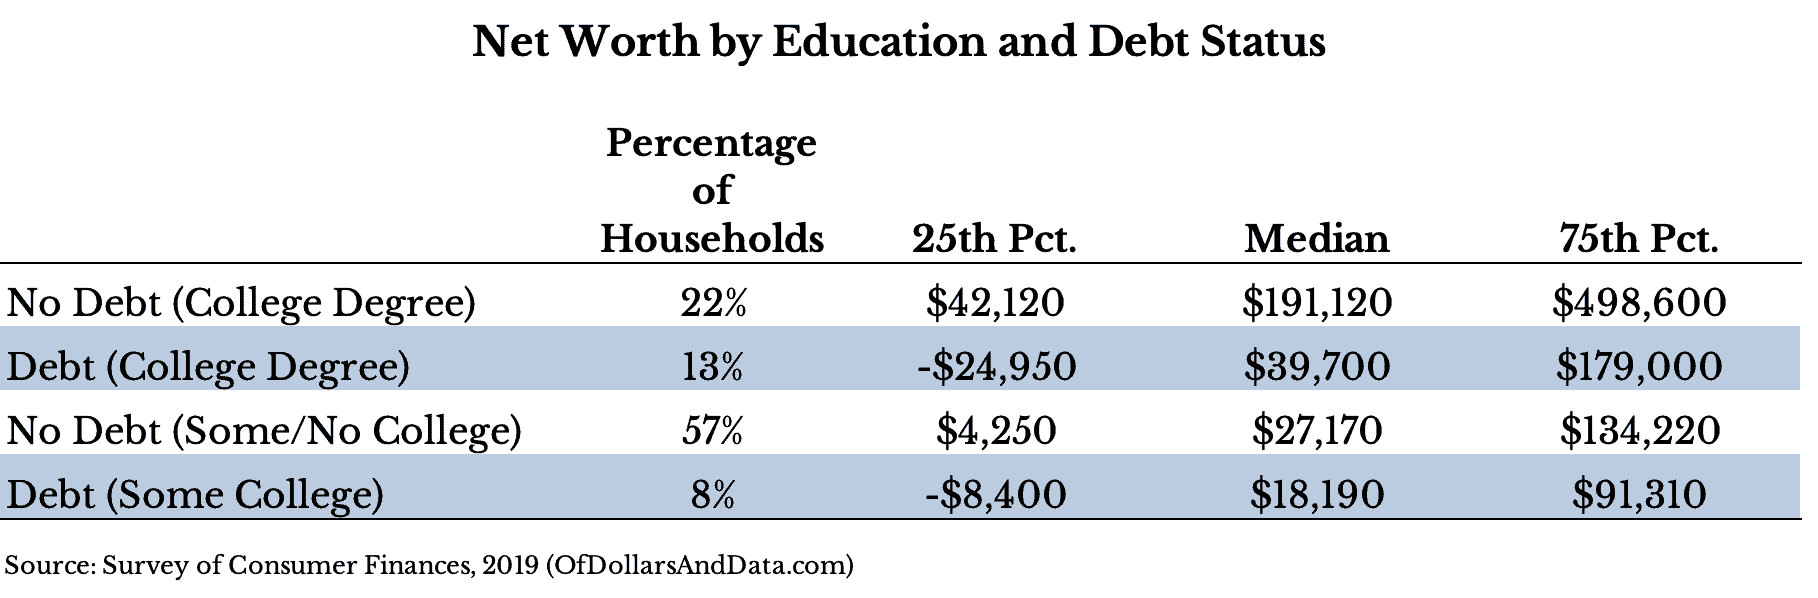 Net worth by debt and education status table.